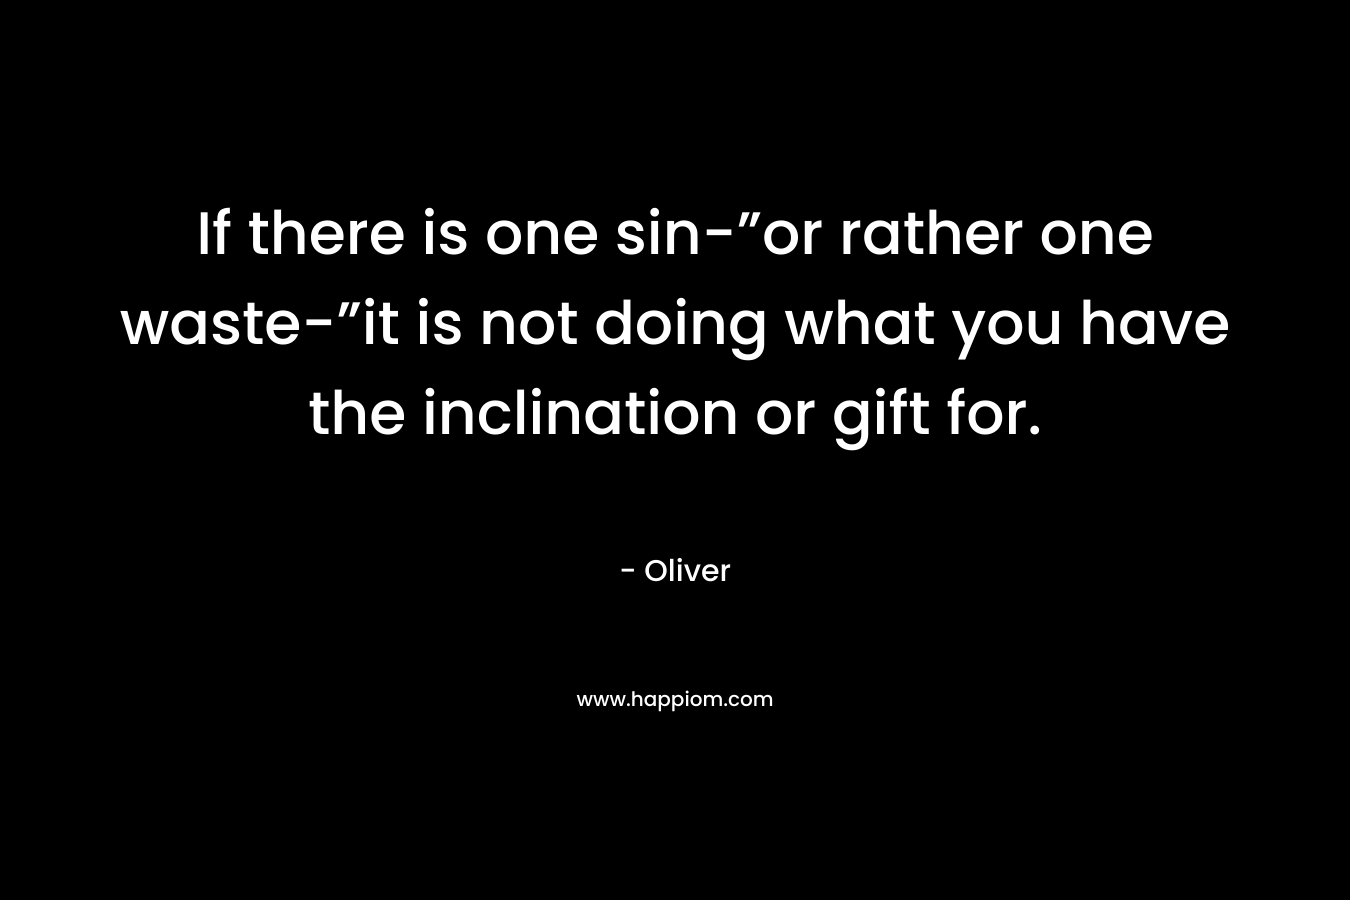 If there is one sin-”or rather one waste-”it is not doing what you have the inclination or gift for. – Oliver